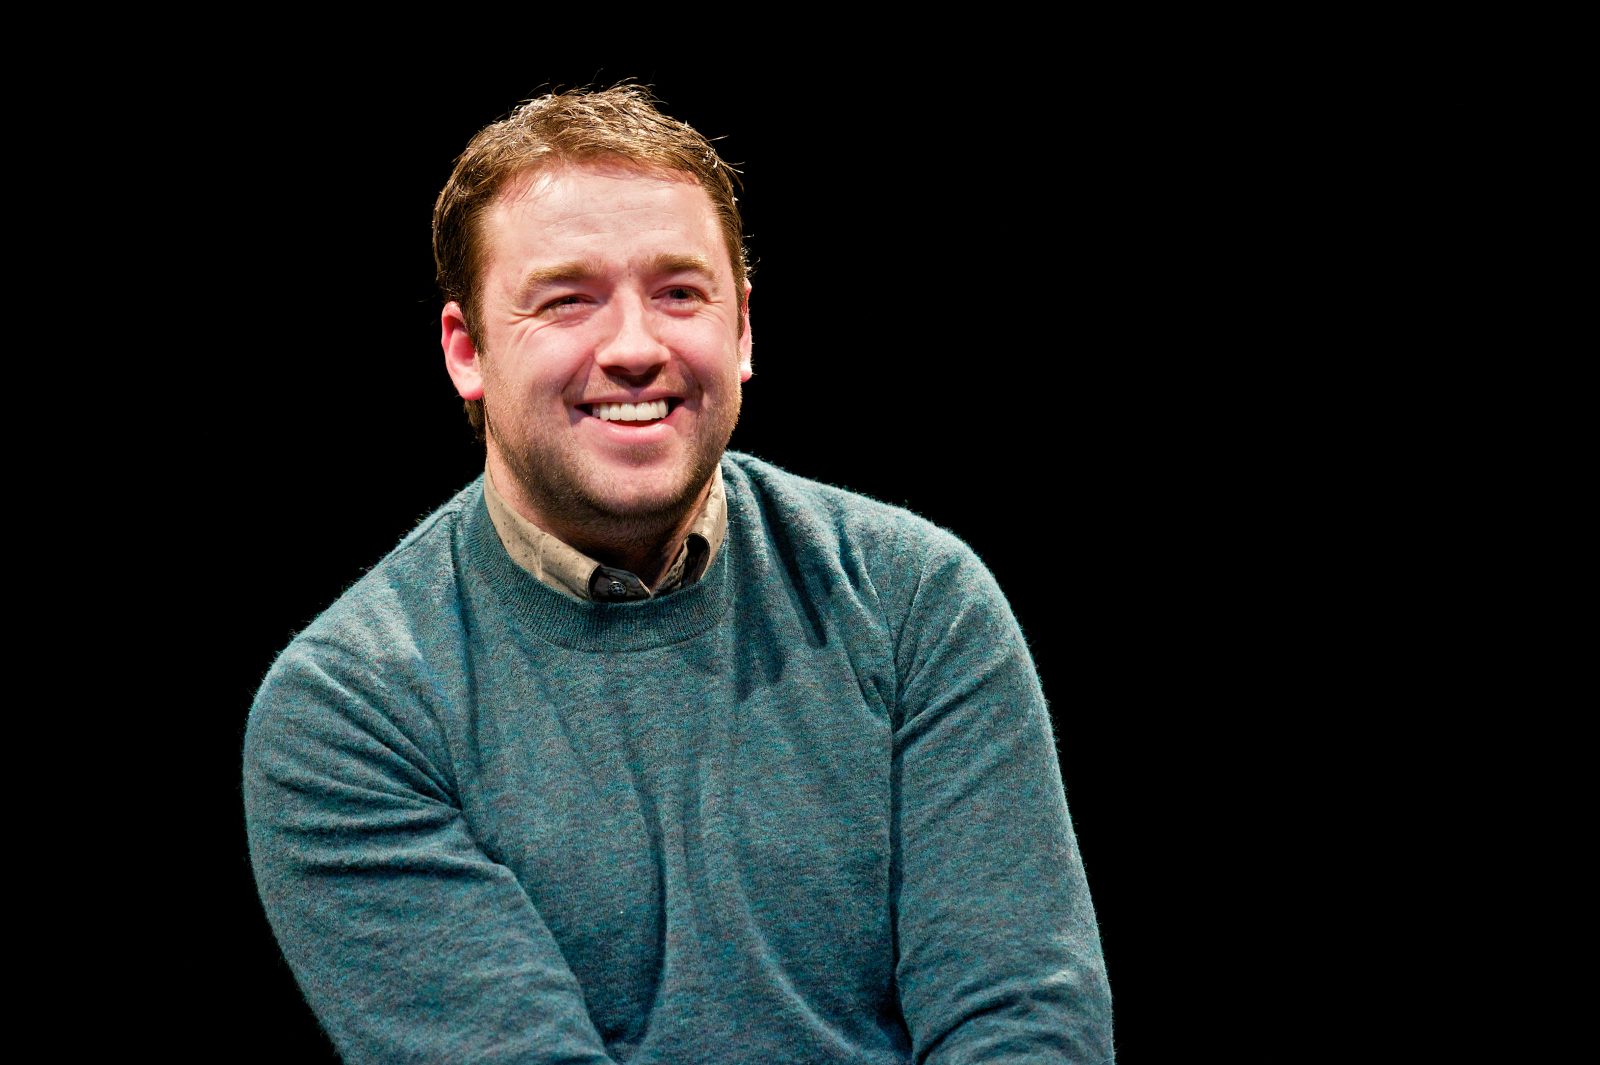 Jason Manford is performing in one of Manchester&#8217;s best beer gardens for an intimate comedy gig, The Manc